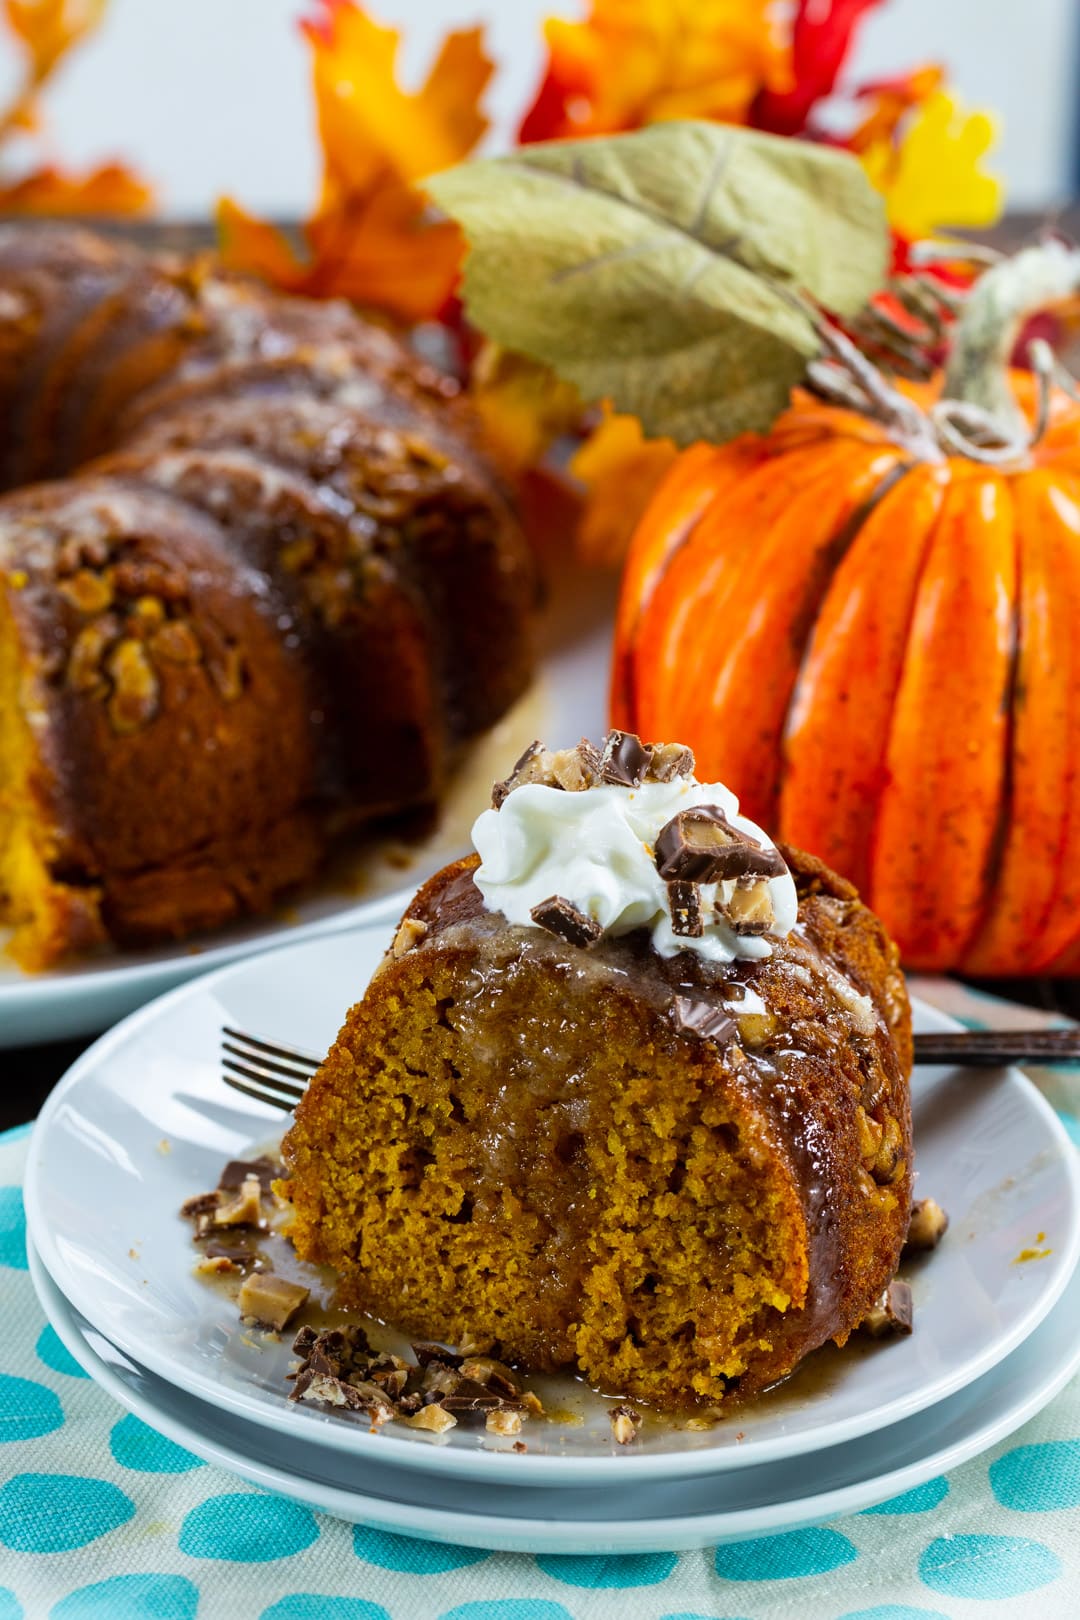 Piece of cake on a plate with pumpkin and rest of cake in background.